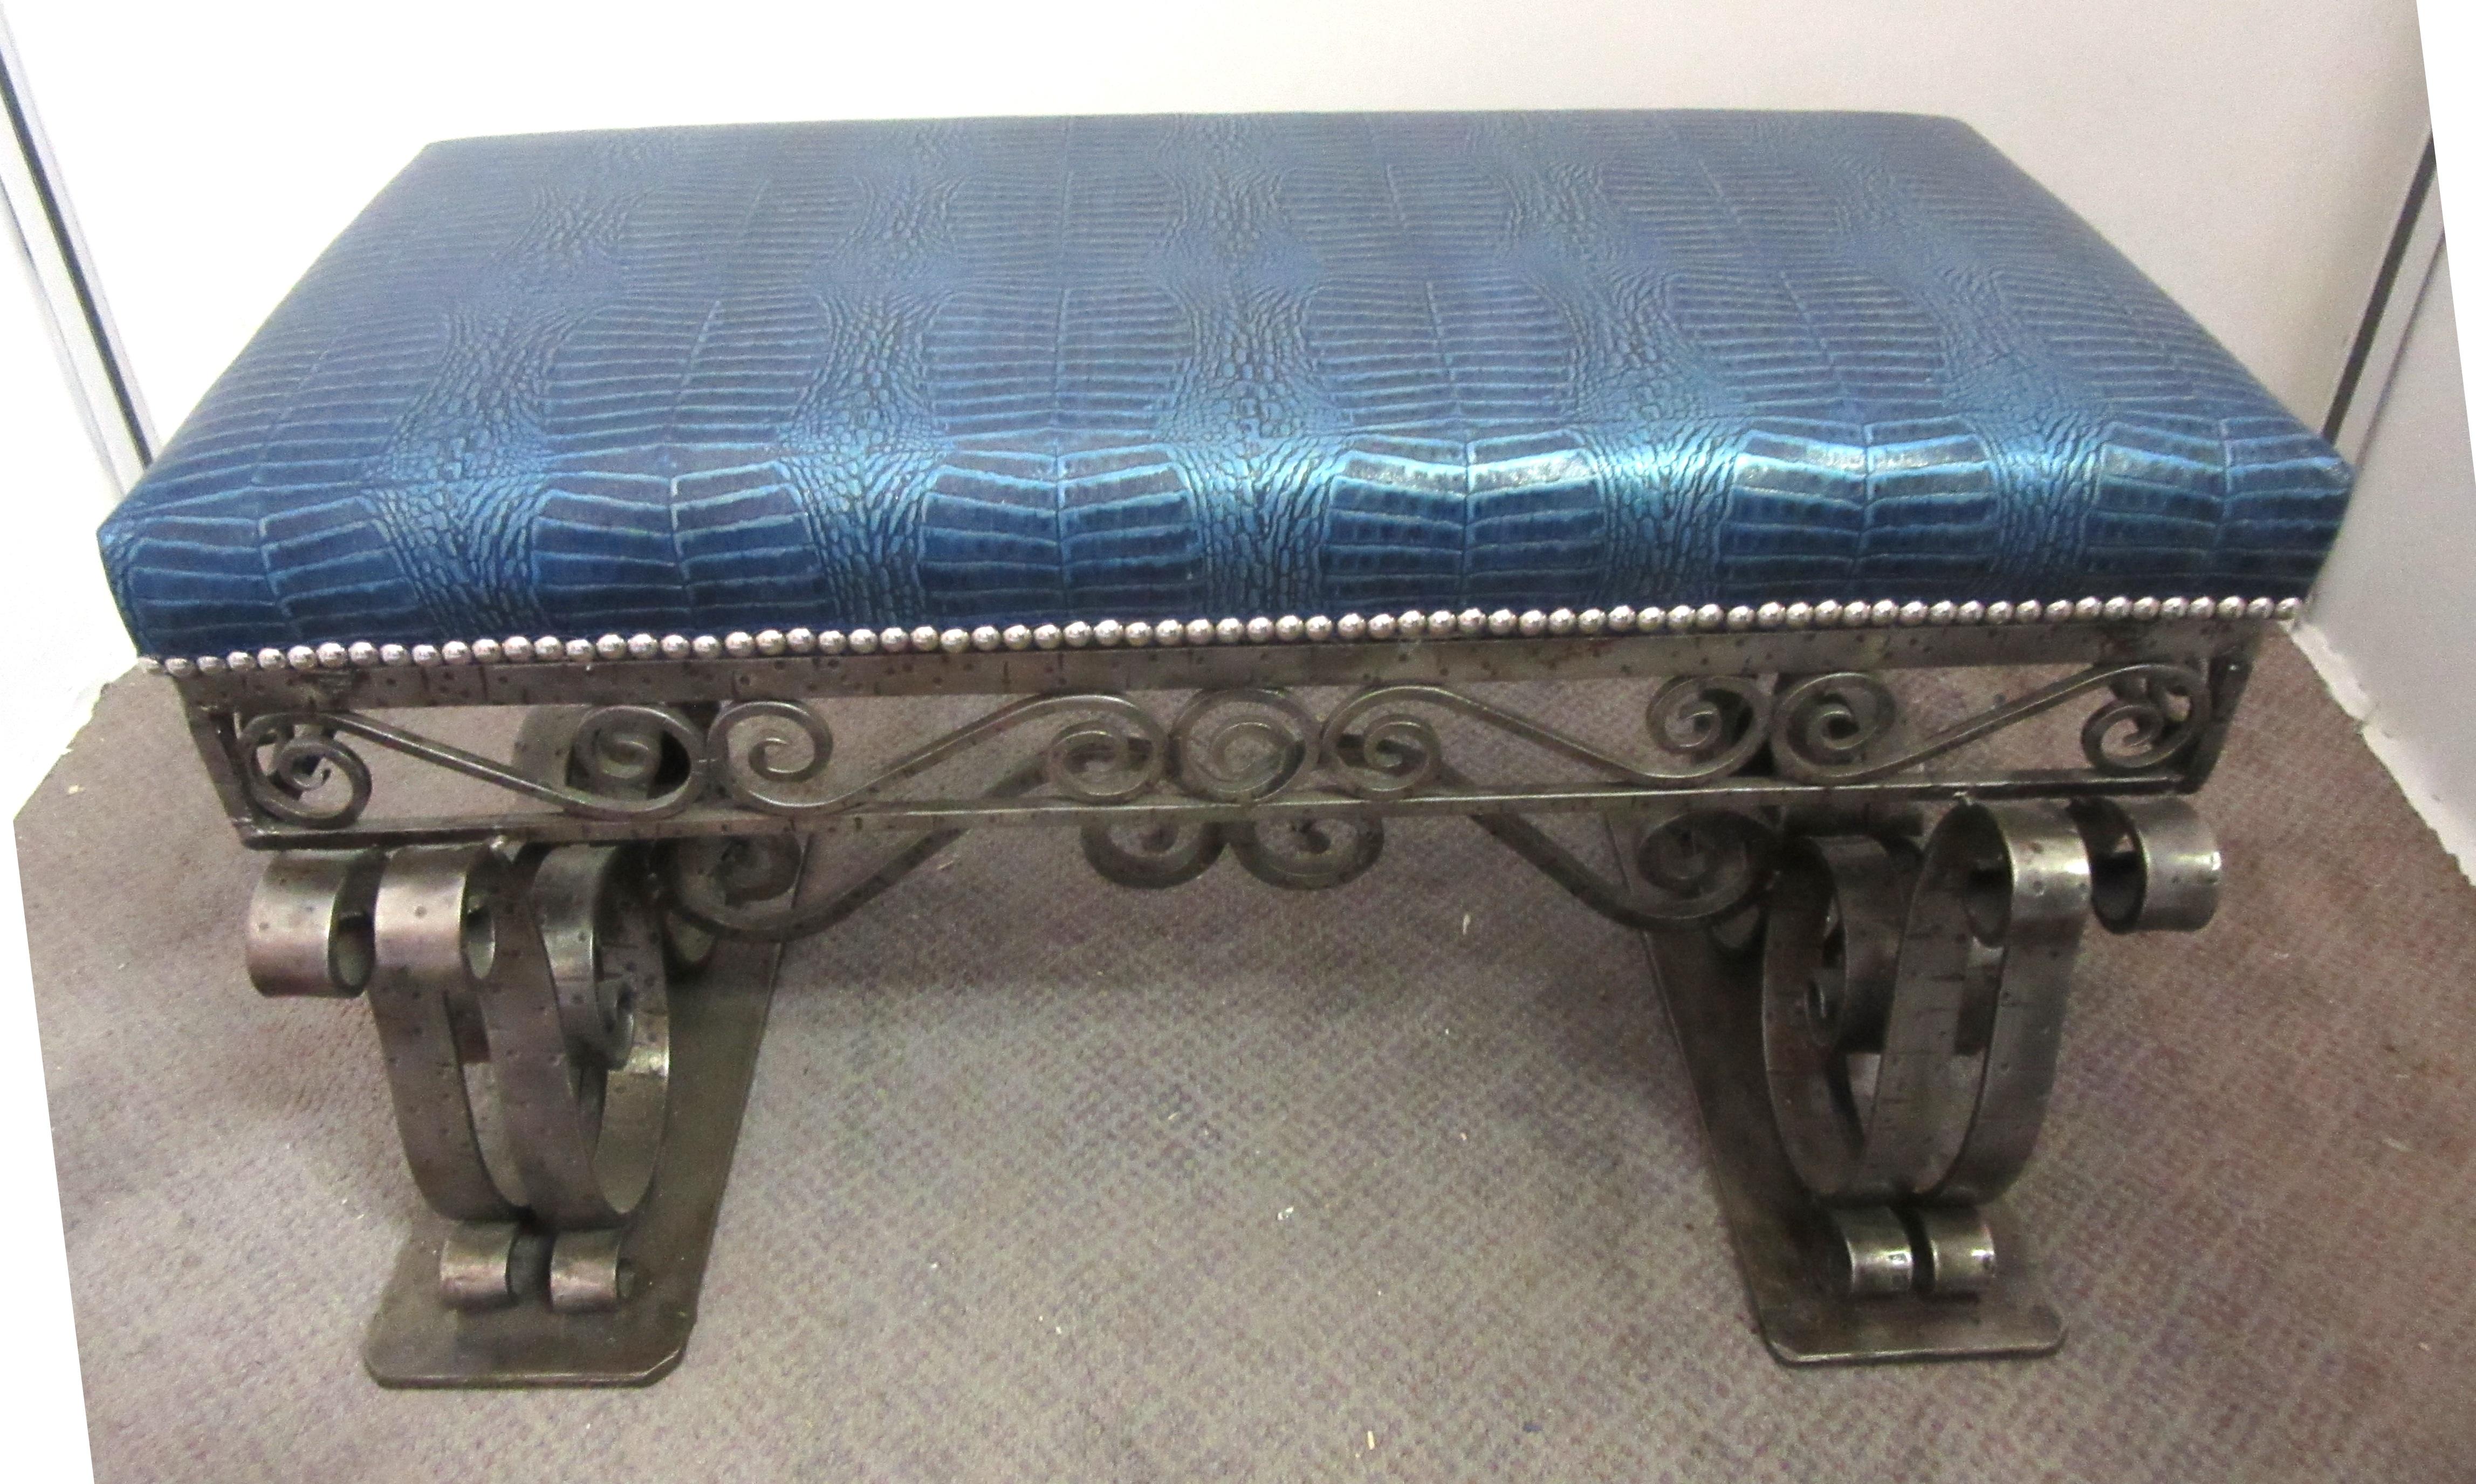 French Art Deco iron bench with elaborate scrolling ornament and heavy details. The bench seat was recently upholstered in a blue faux alligator leather with chrome nailheads.
In great vintage condition with age-appropriate wear and use.